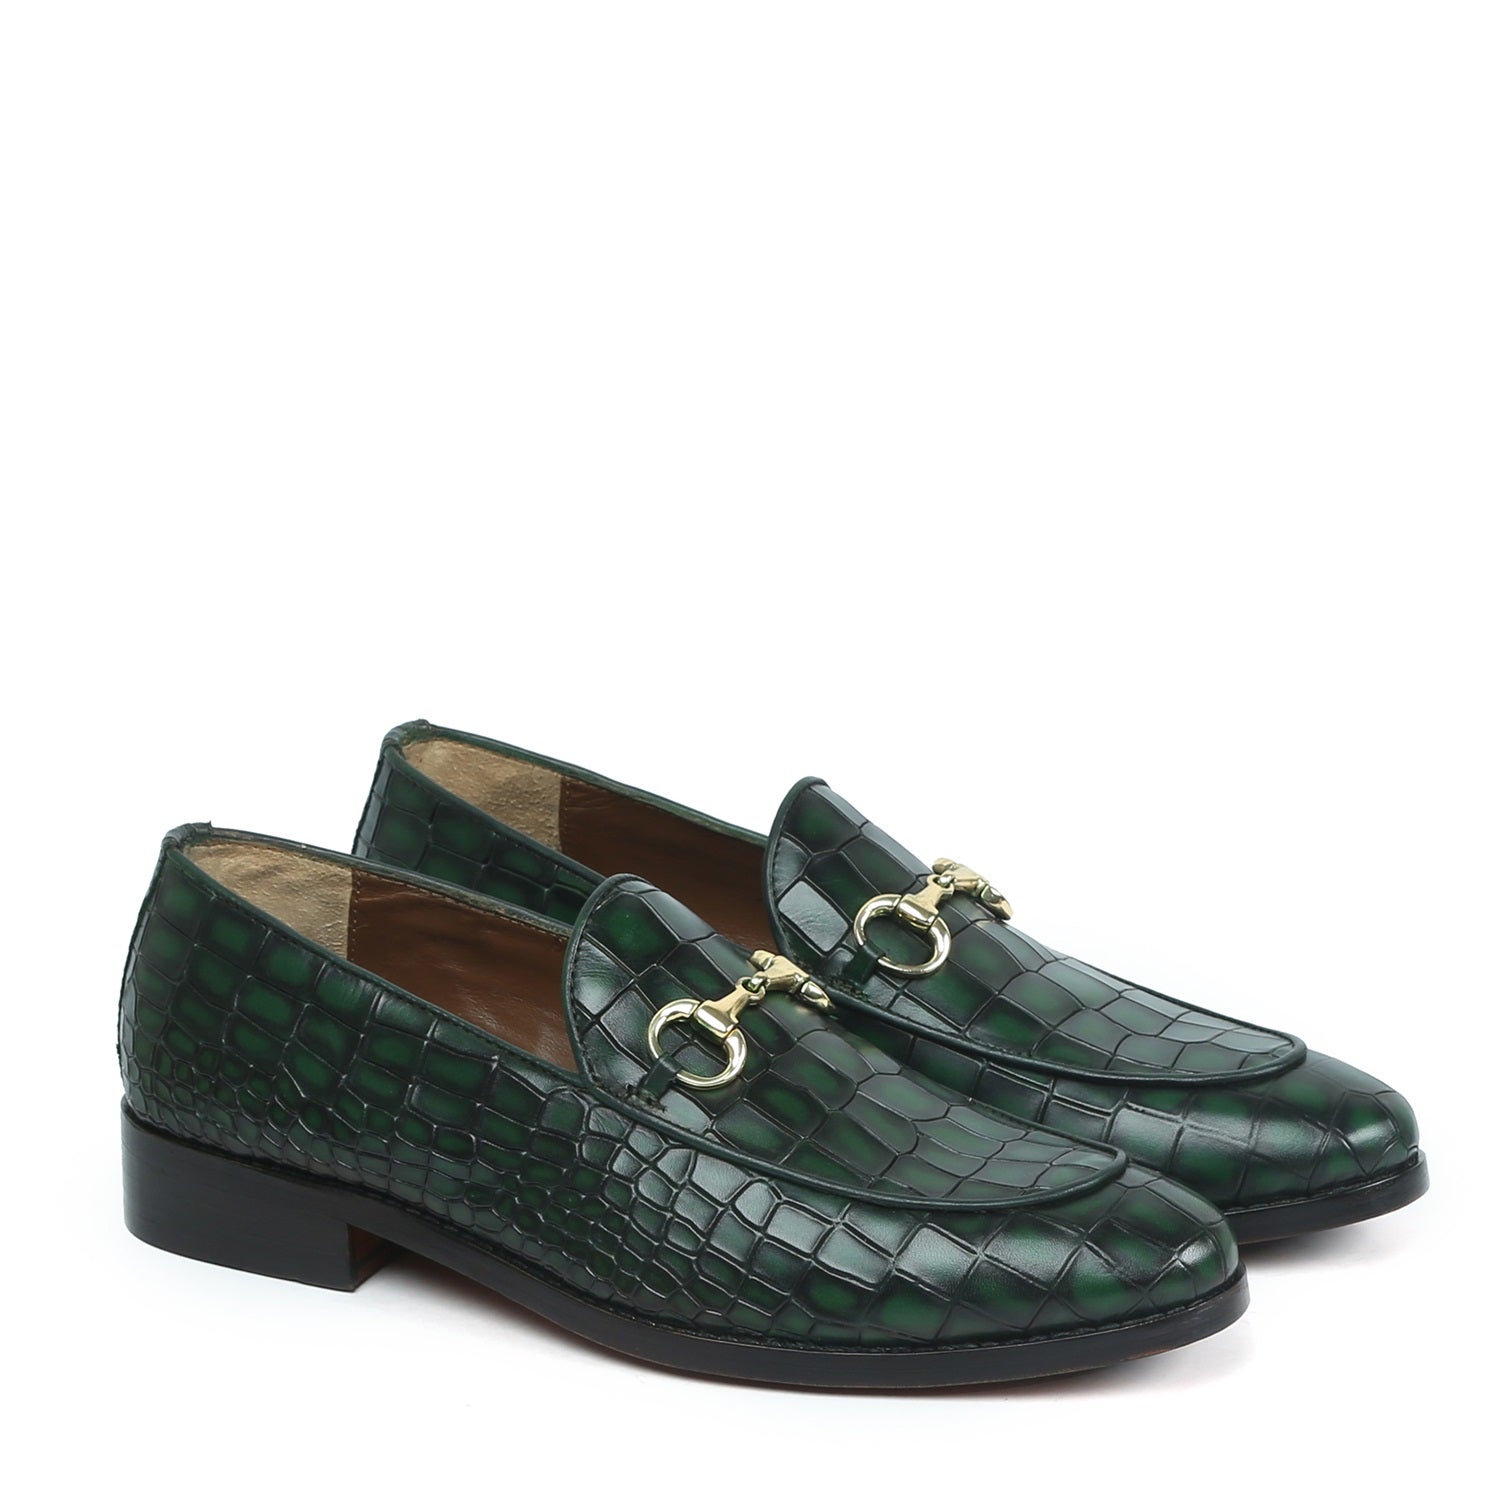 Smokey Finish Leather Loafer In Green Color With Horse-bit Buckle